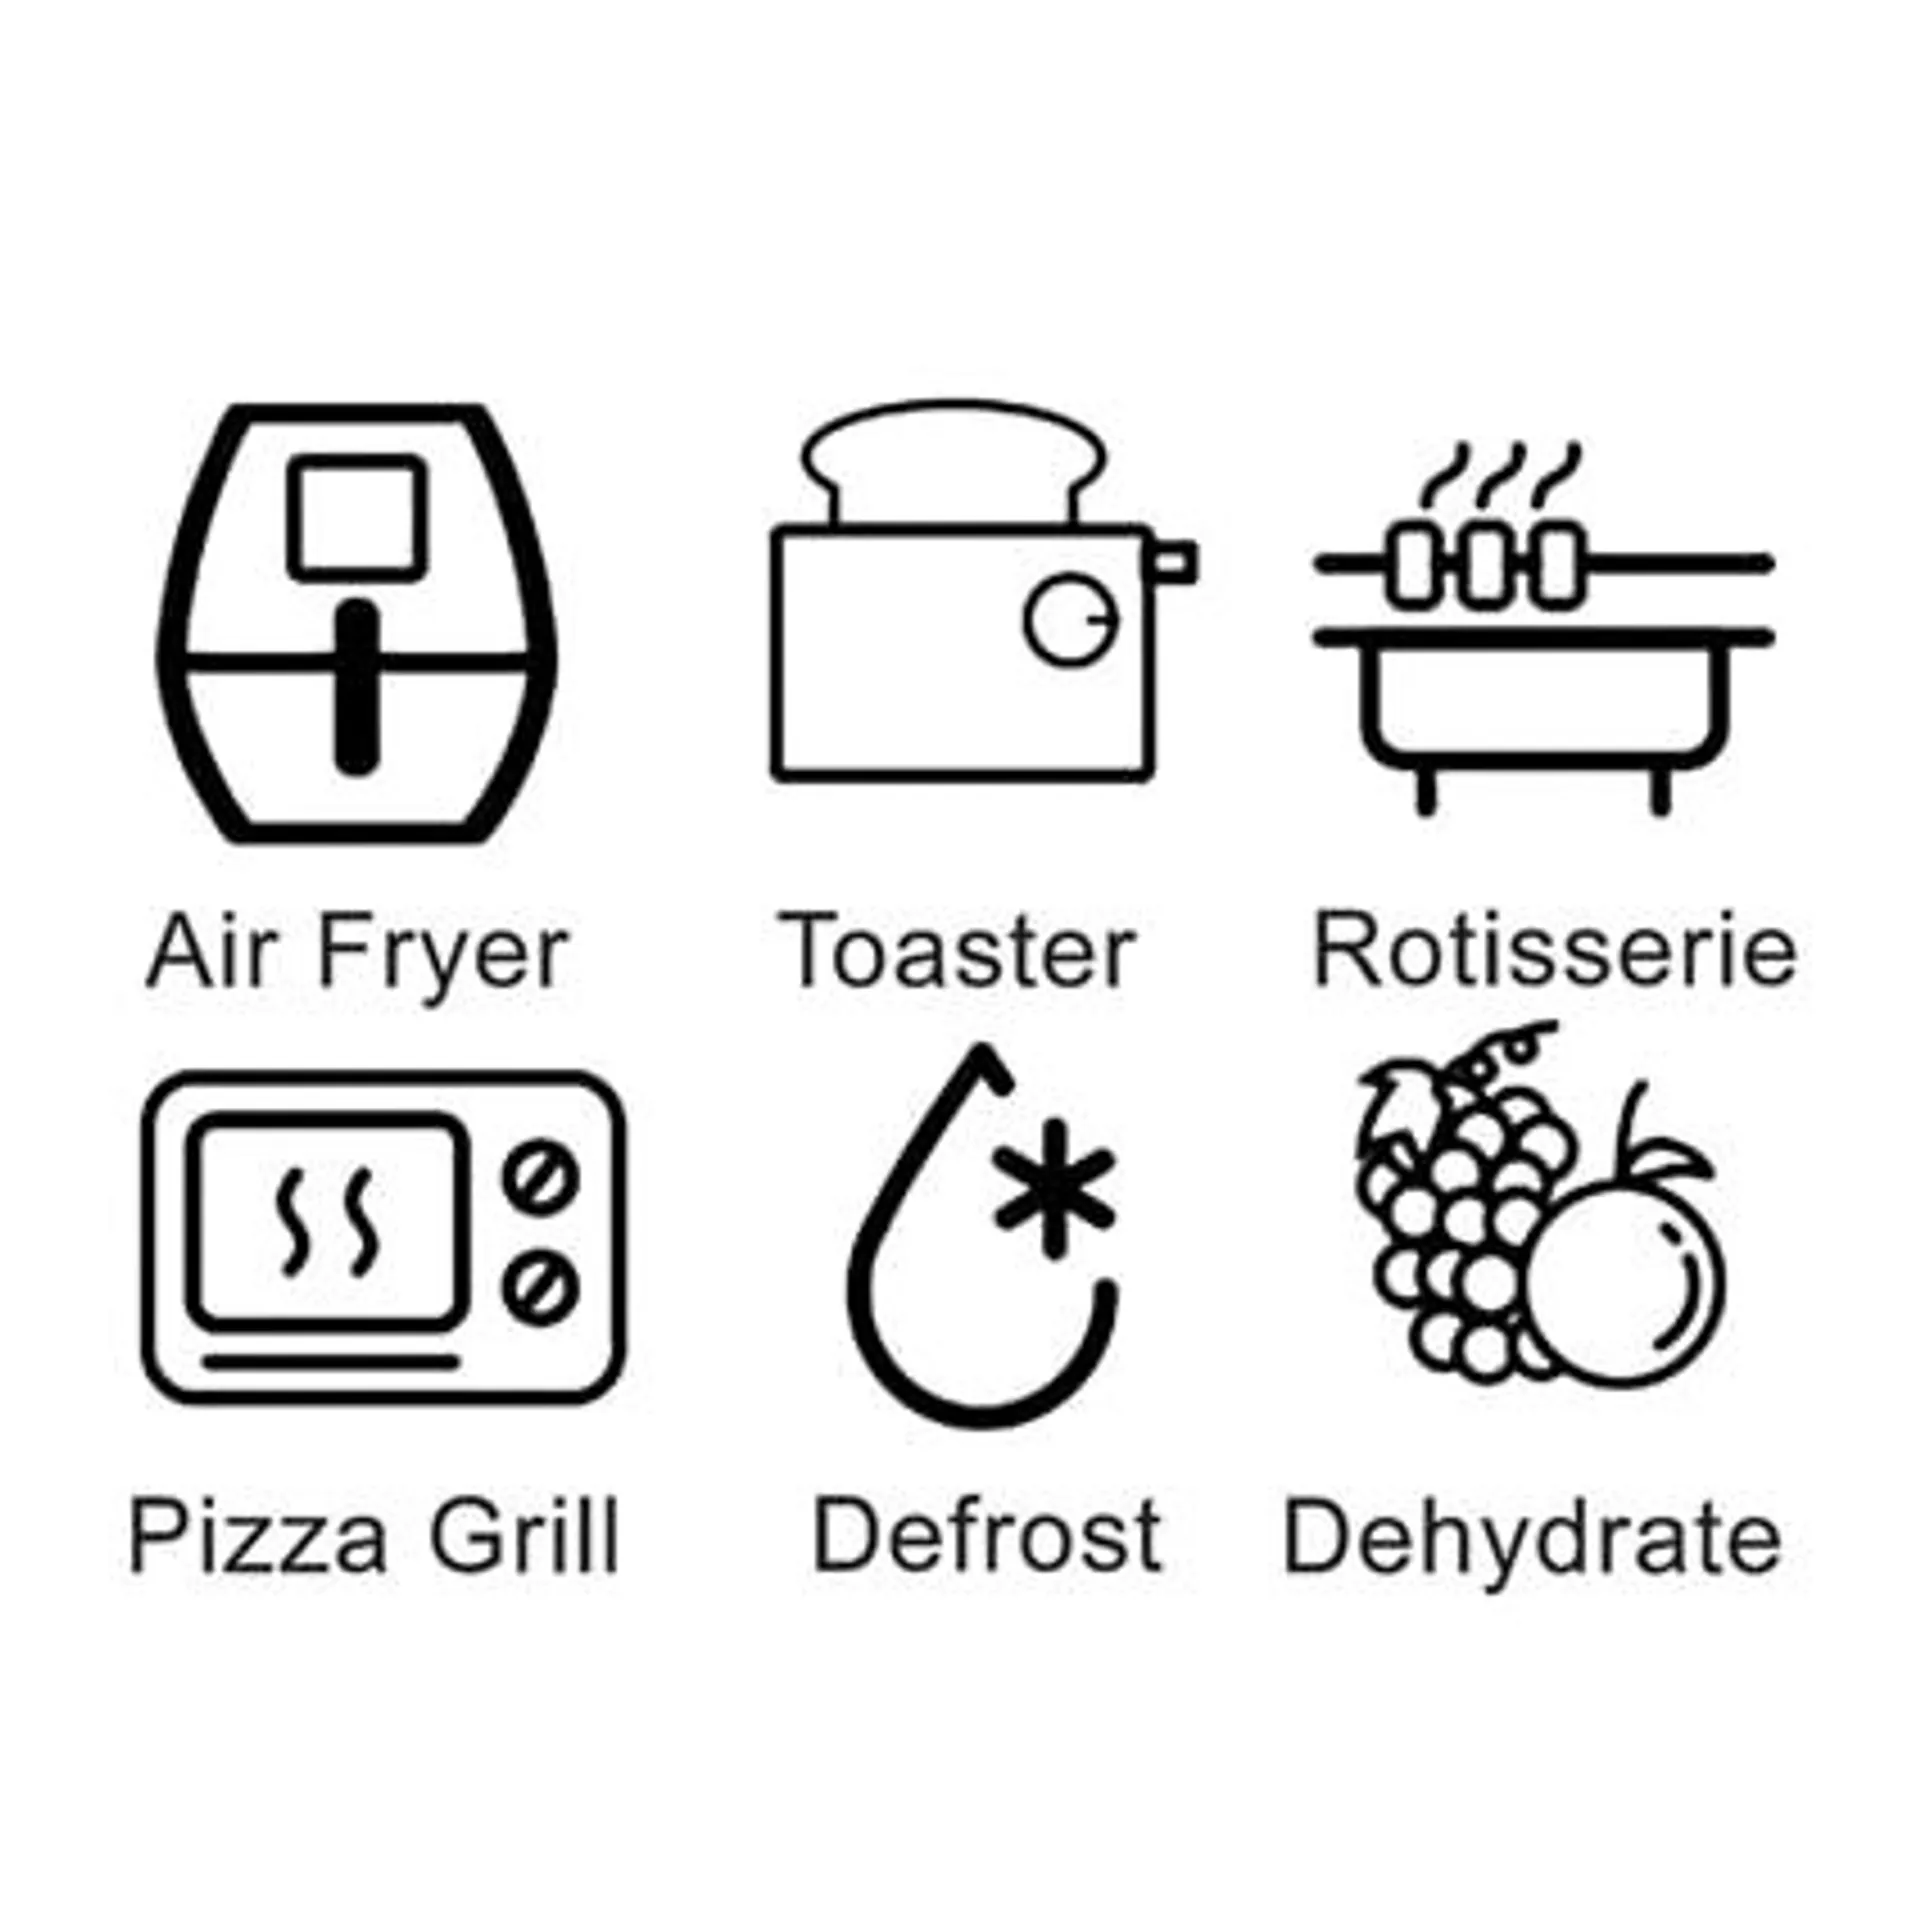 Air Fryer and Rotisserie